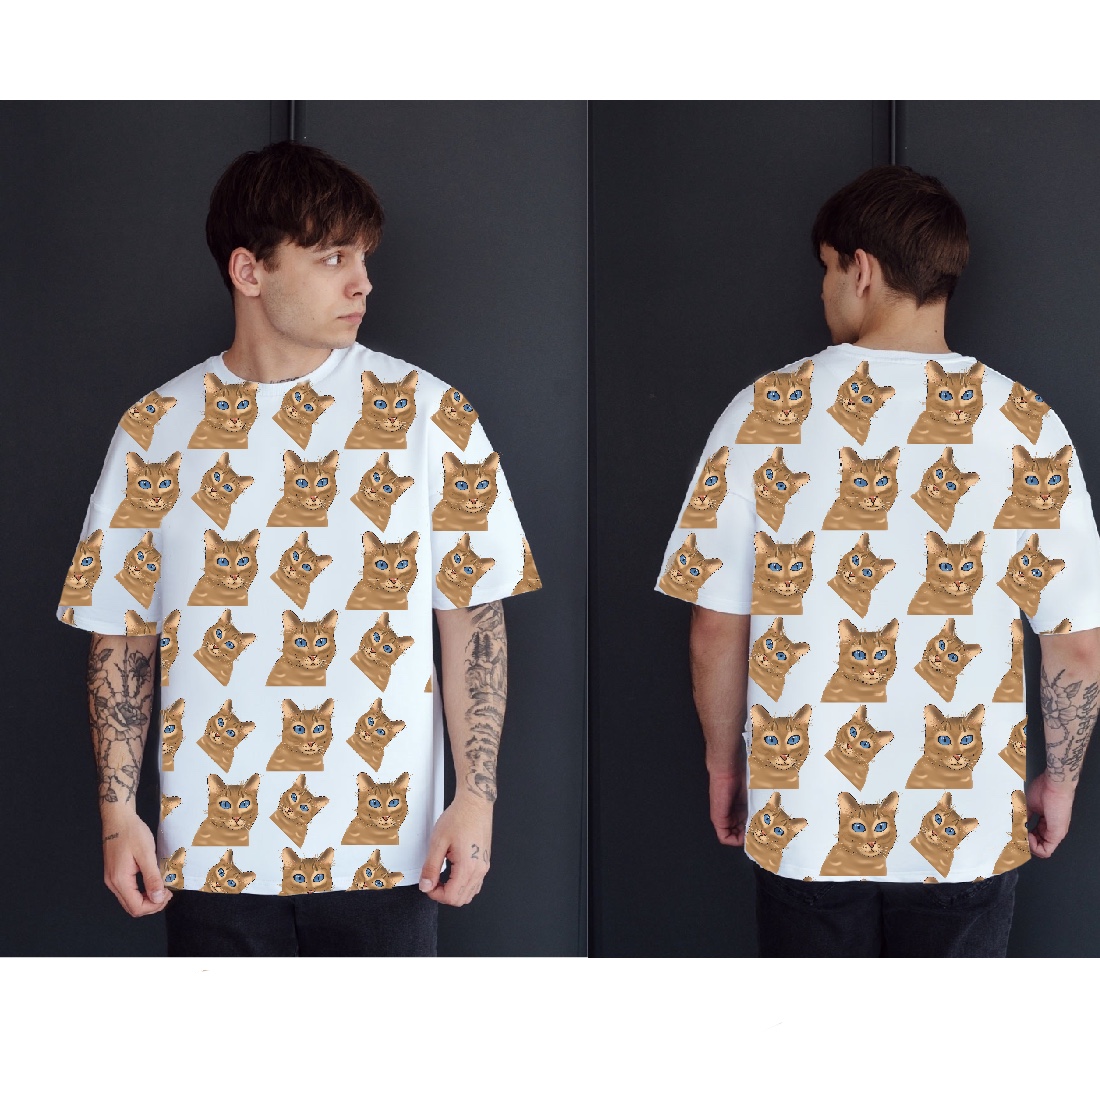 White t-shirt with cats print.